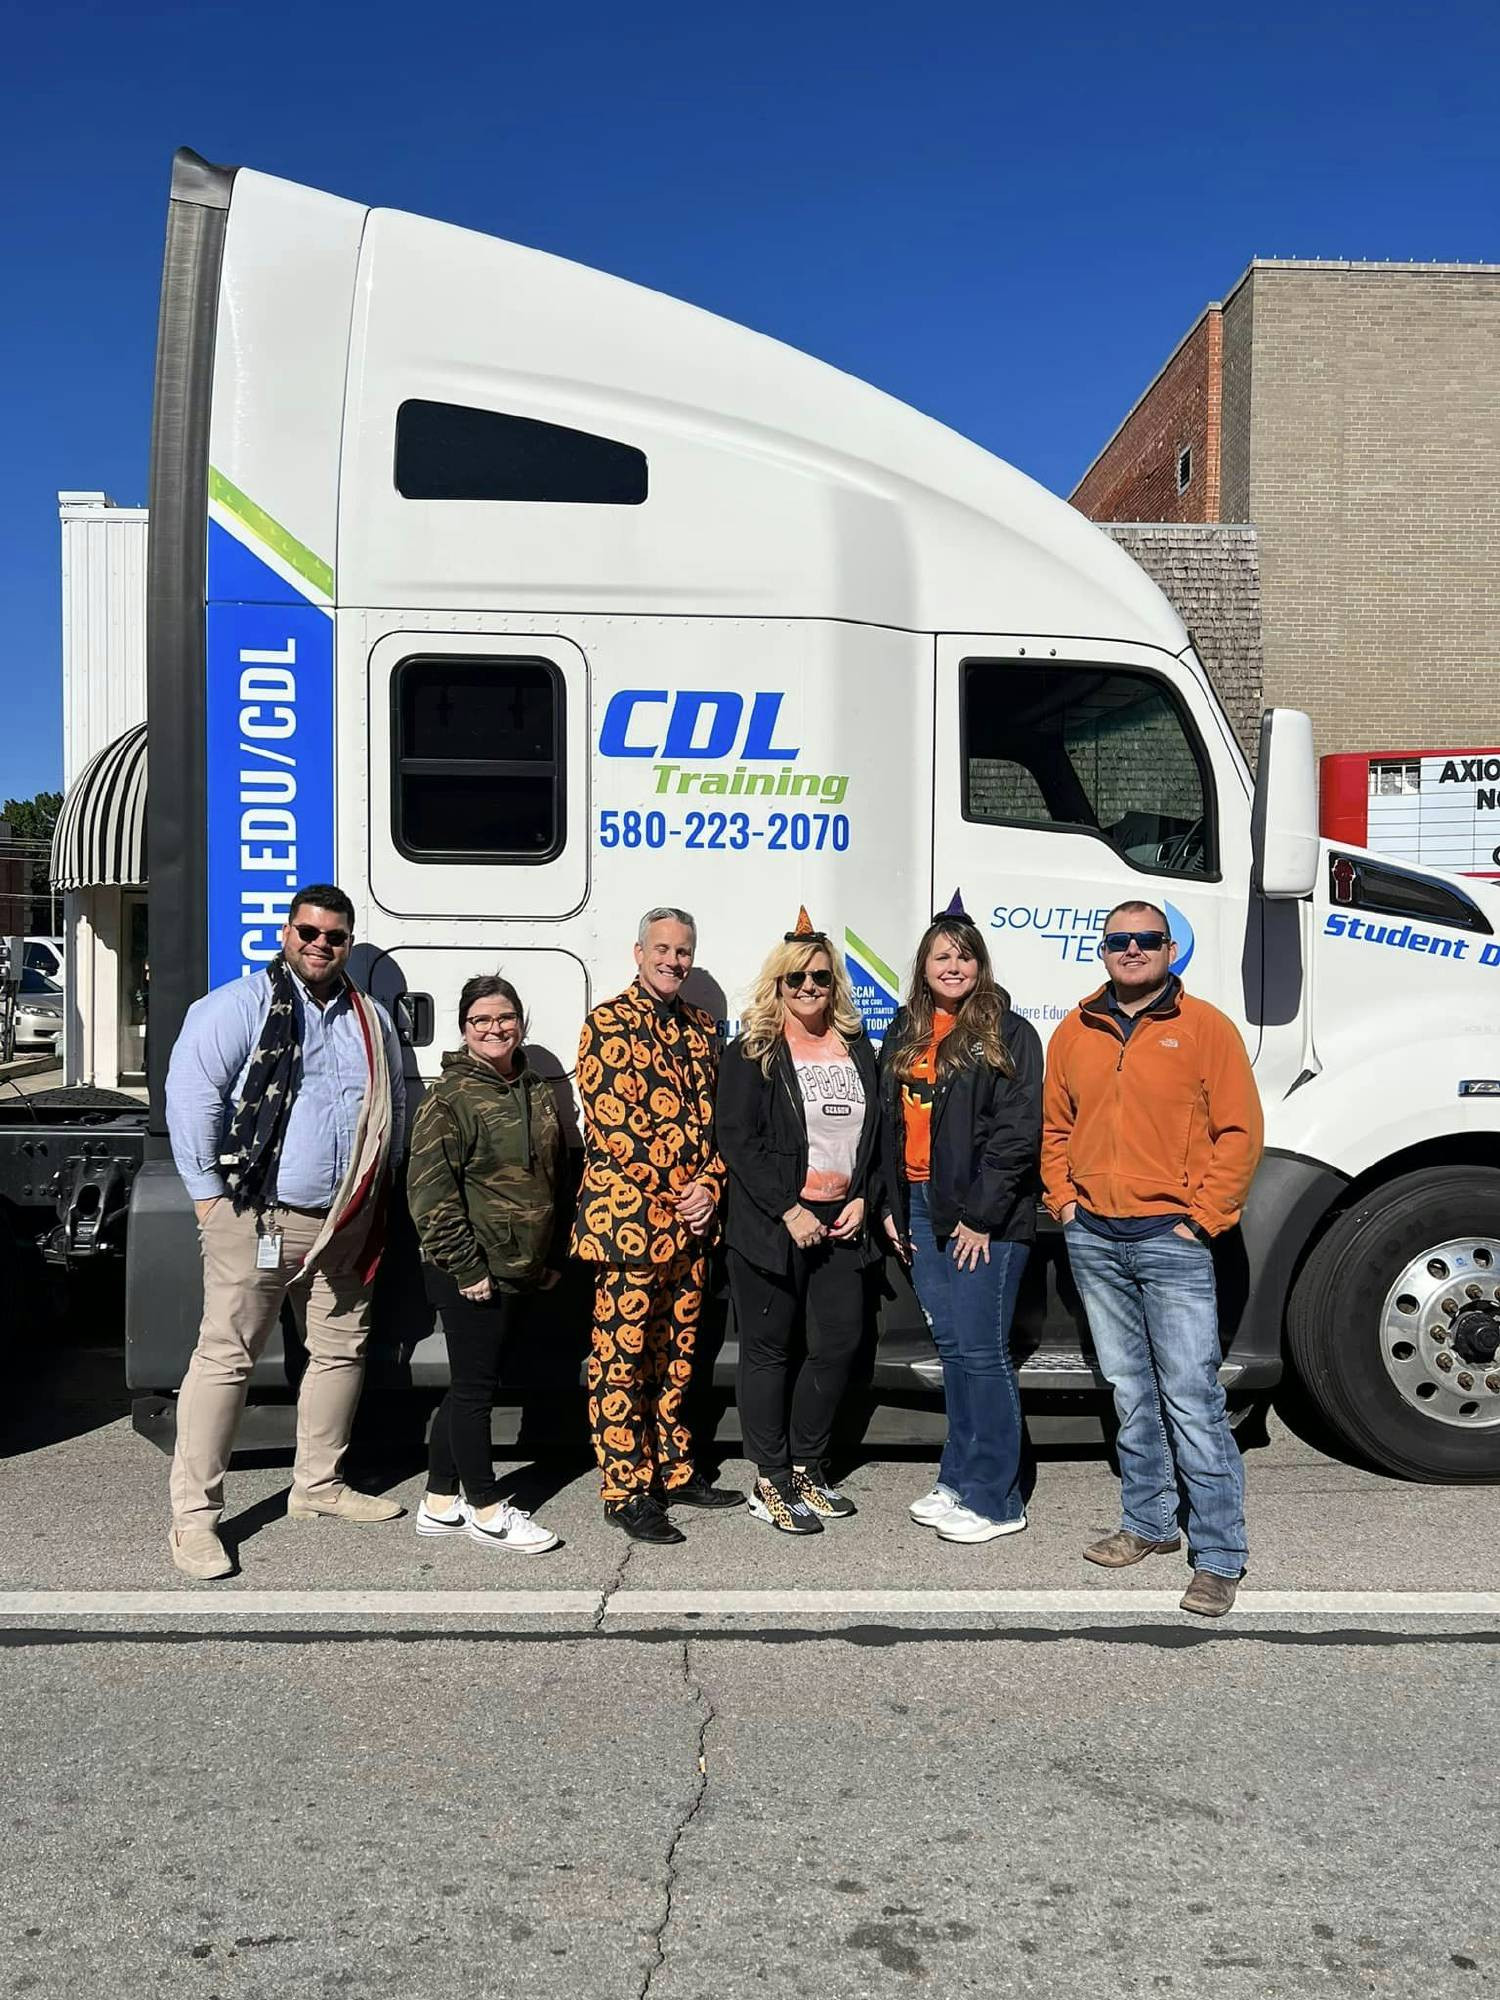 Our staff handed out candy at our community halloween event and talked to people about CDL training and other careers.